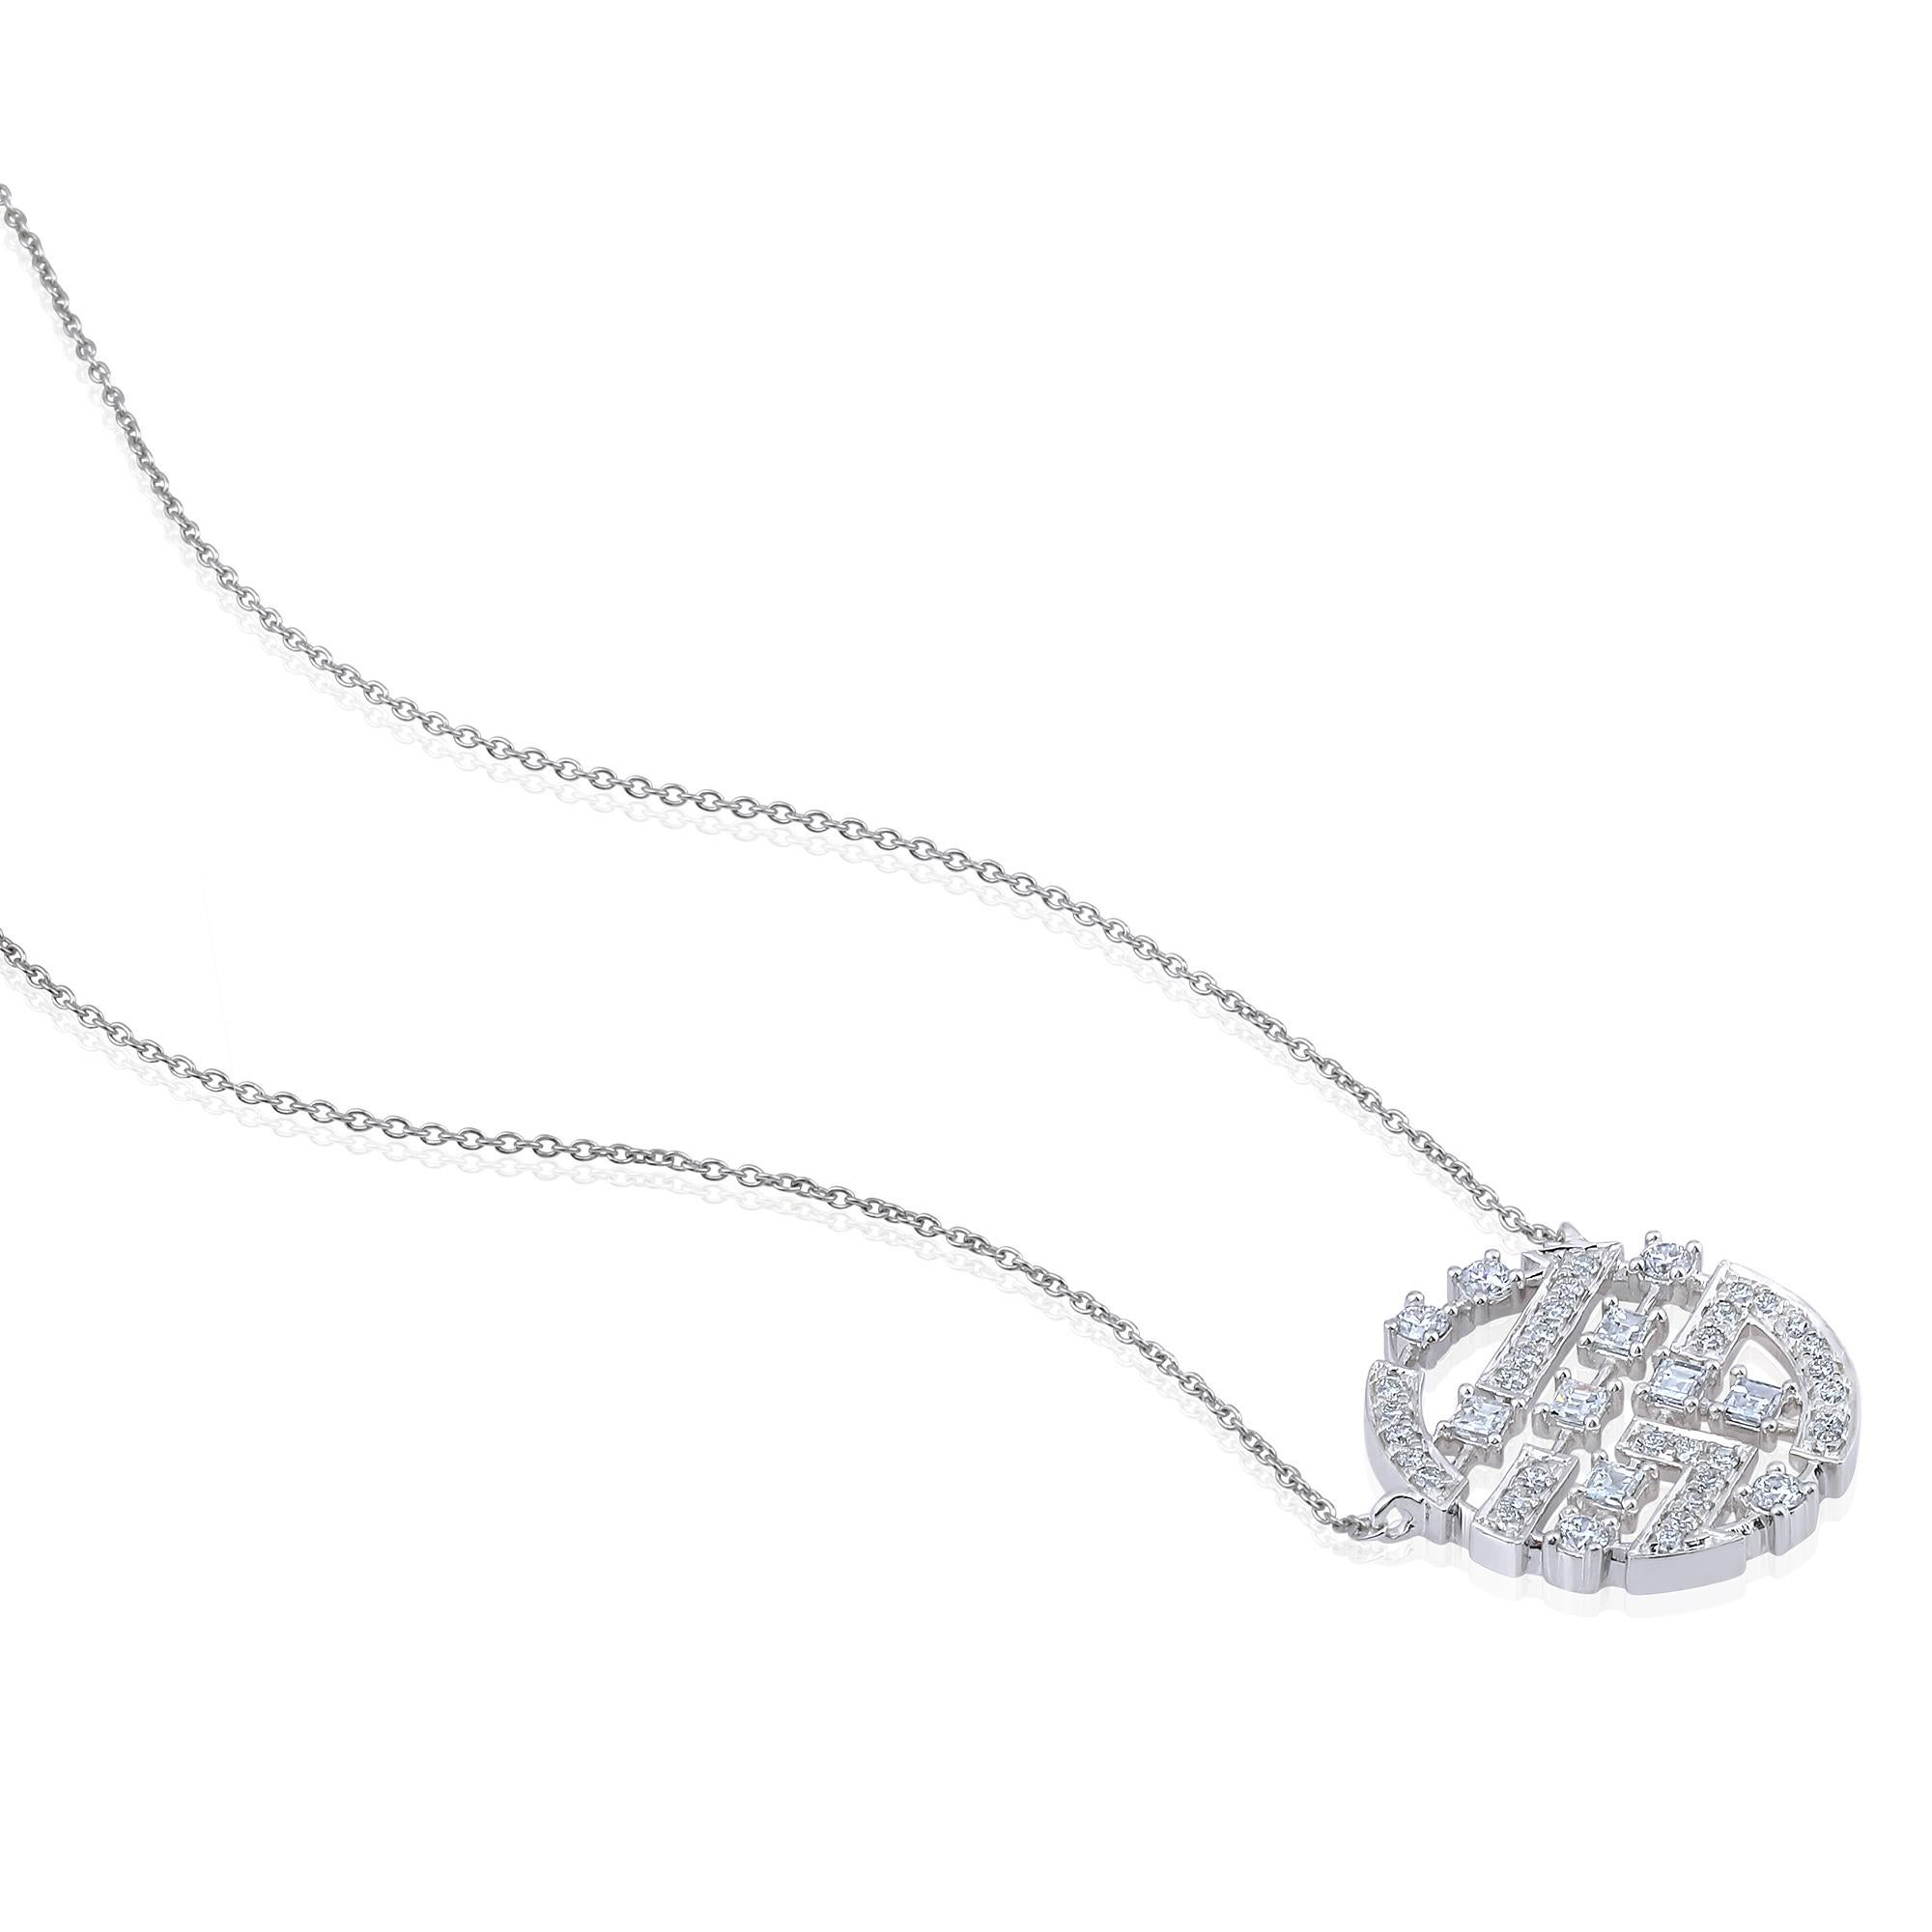 Crafted in 8.55 grams of 14-karat White Gold, The Galette Necklace & Stud Earrings Jewelry Set contains 84 Stones of Round Diamonds with a total of 0.79-Carats in F-G Color and VVS-VS Clarity combined with 10 Stones of Baguette Diamonds with a total